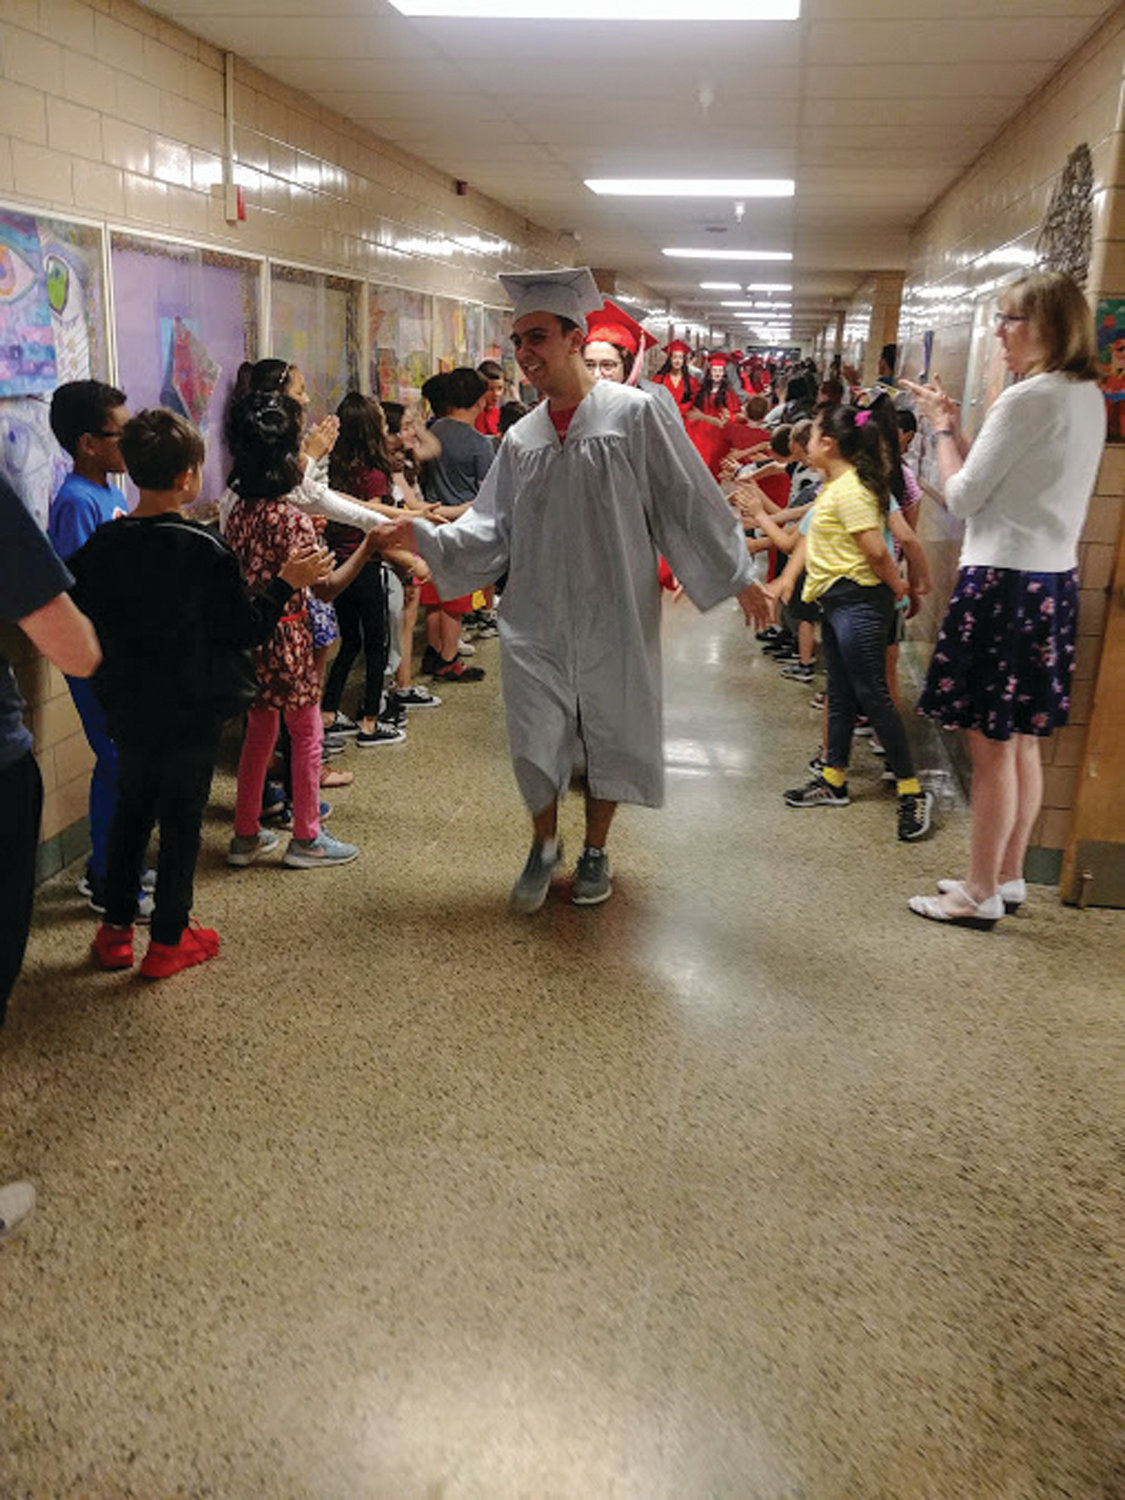 HIGH FIVES AND APPLAUSE: At Woodridge Elementary School, staff and students lined the hallways, sharing hugs, high-fives and a round of applause as the seniors walked through.